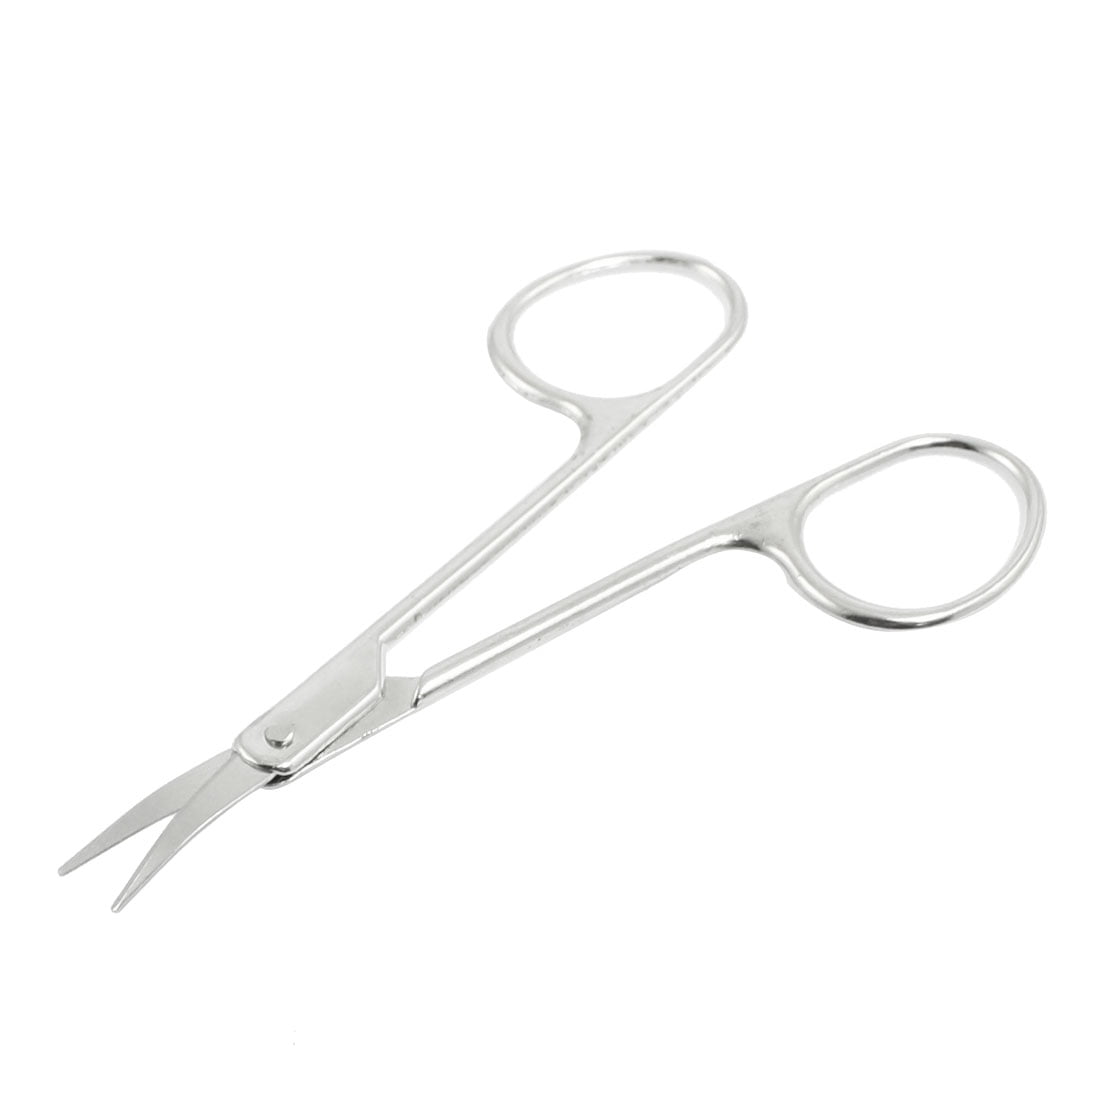 Jnaneei Stainless Steel Eyebrow Scissors with Comb Curved Trimmer Grooming Beauty Tools